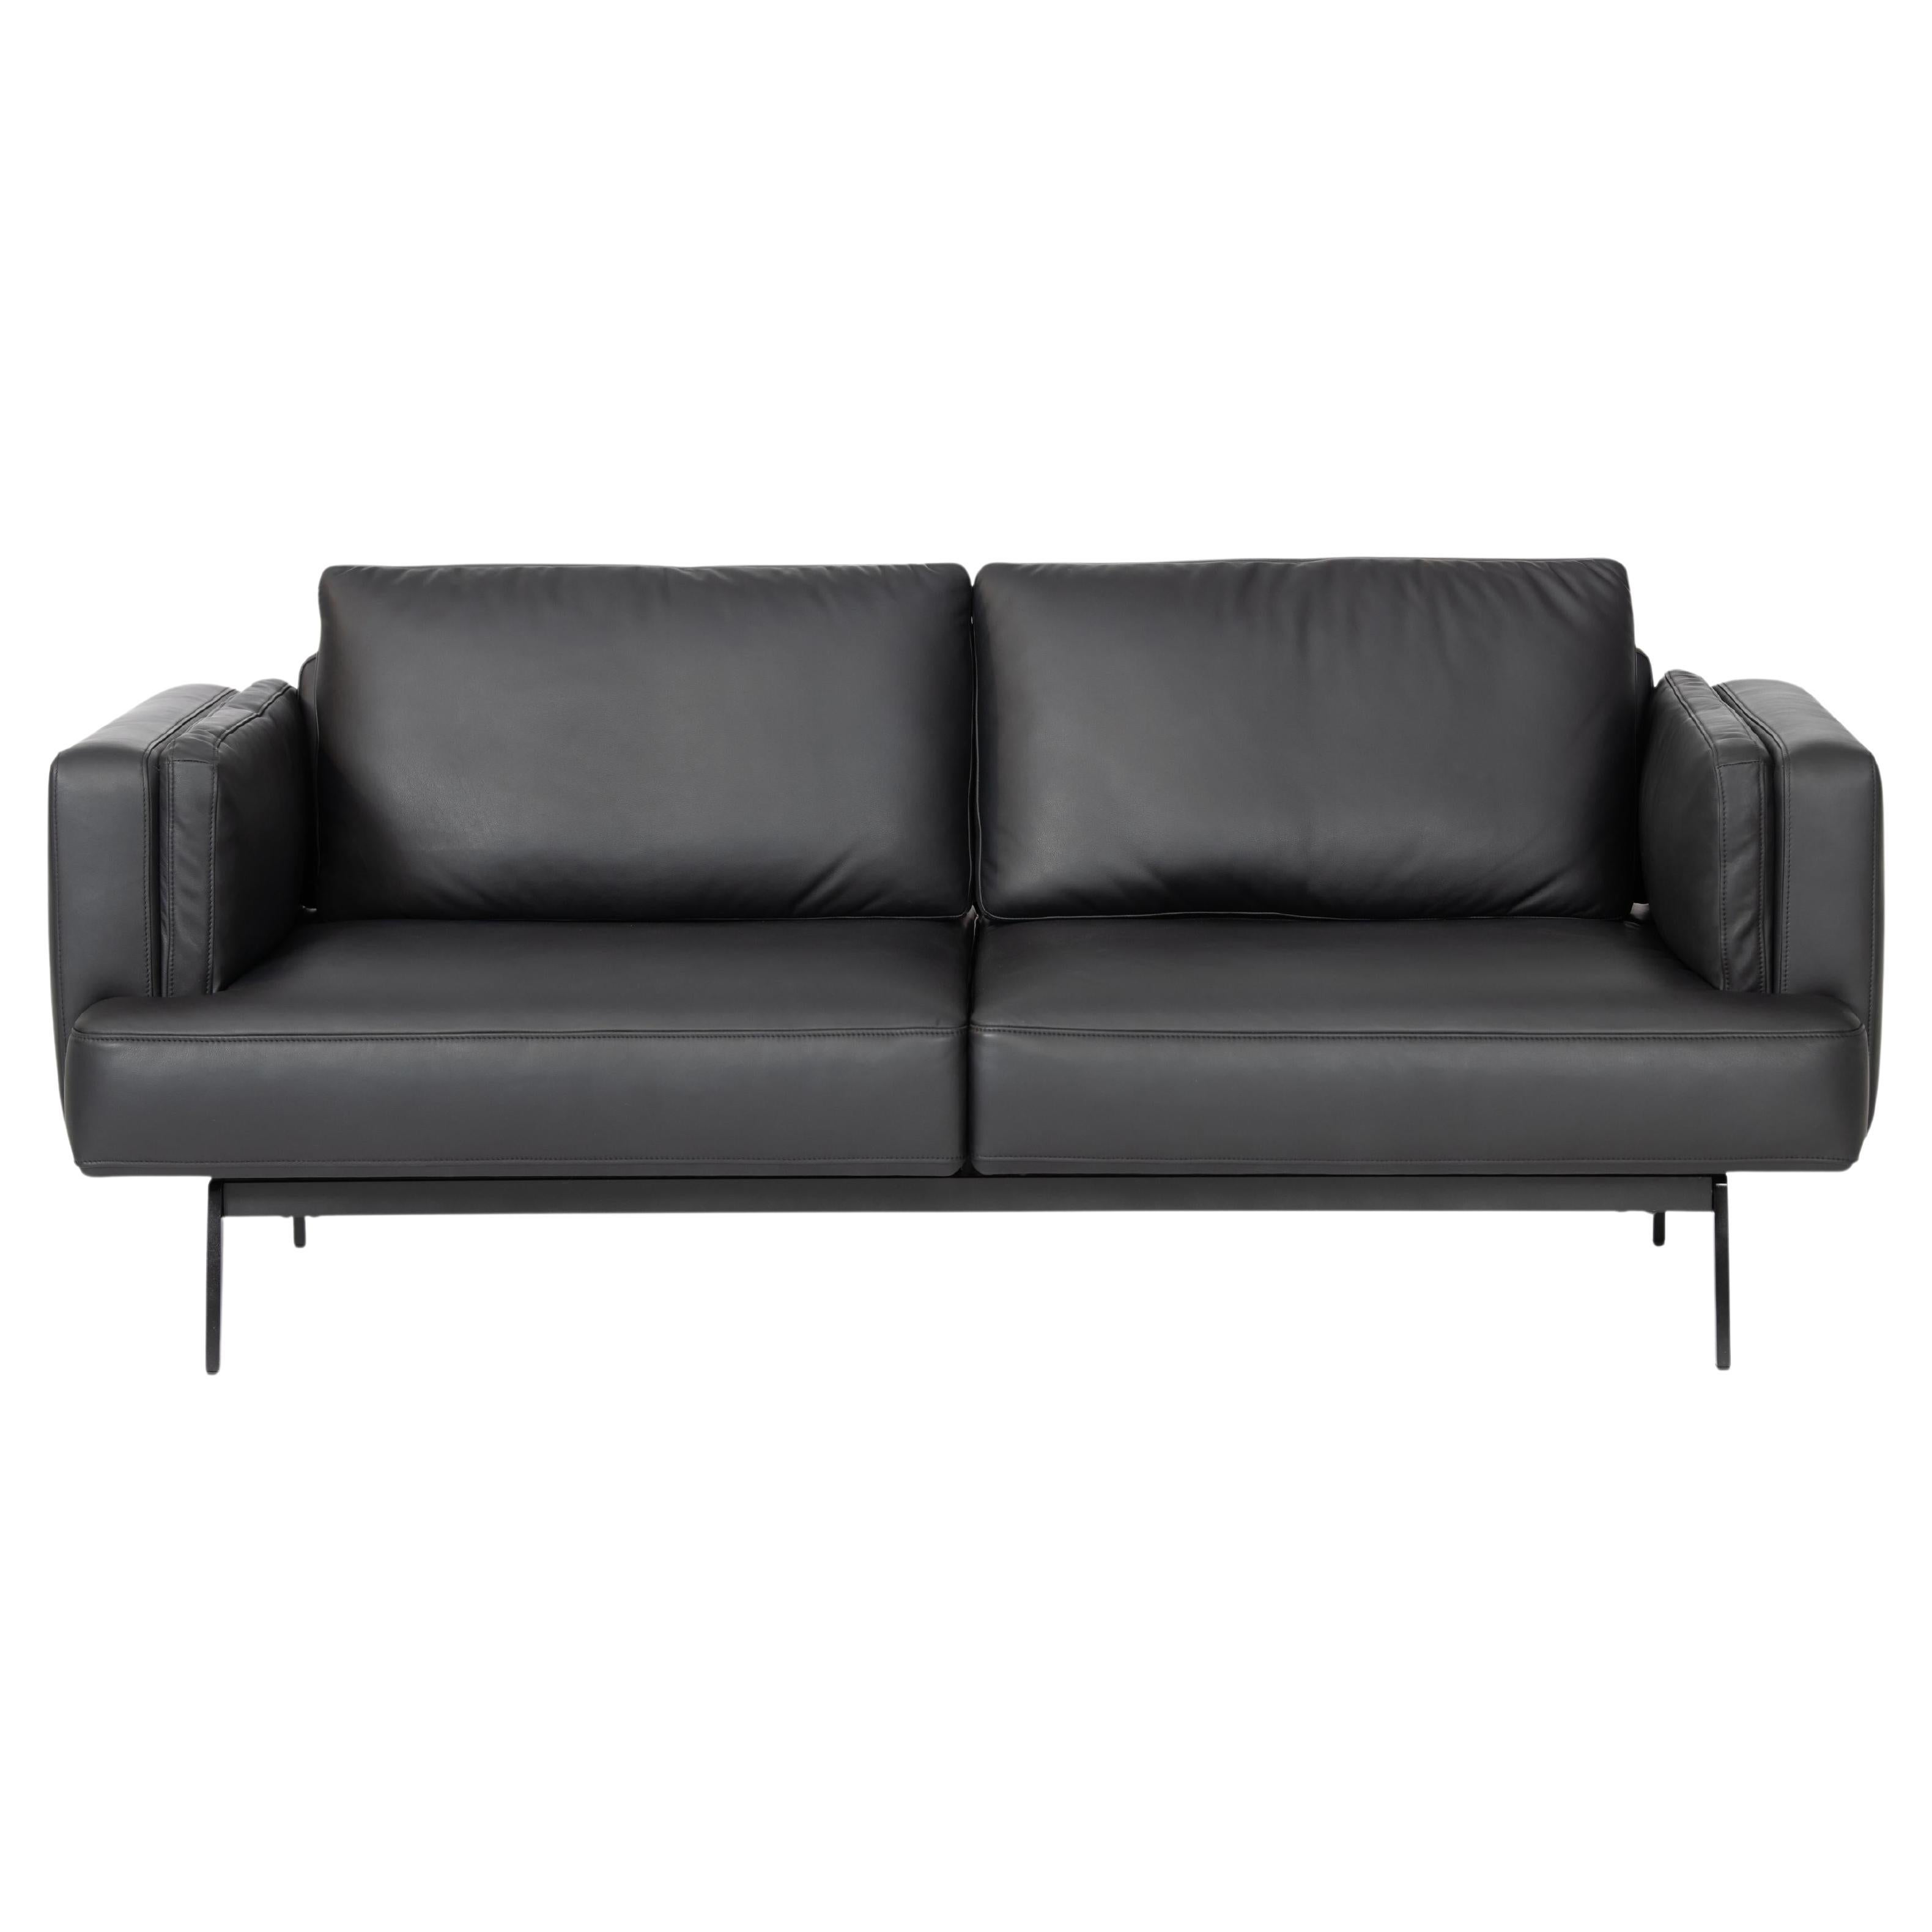 DeSede Ds-747/04 Multifunctional Sofa in Black Leather Seat and Back Upholstery For Sale